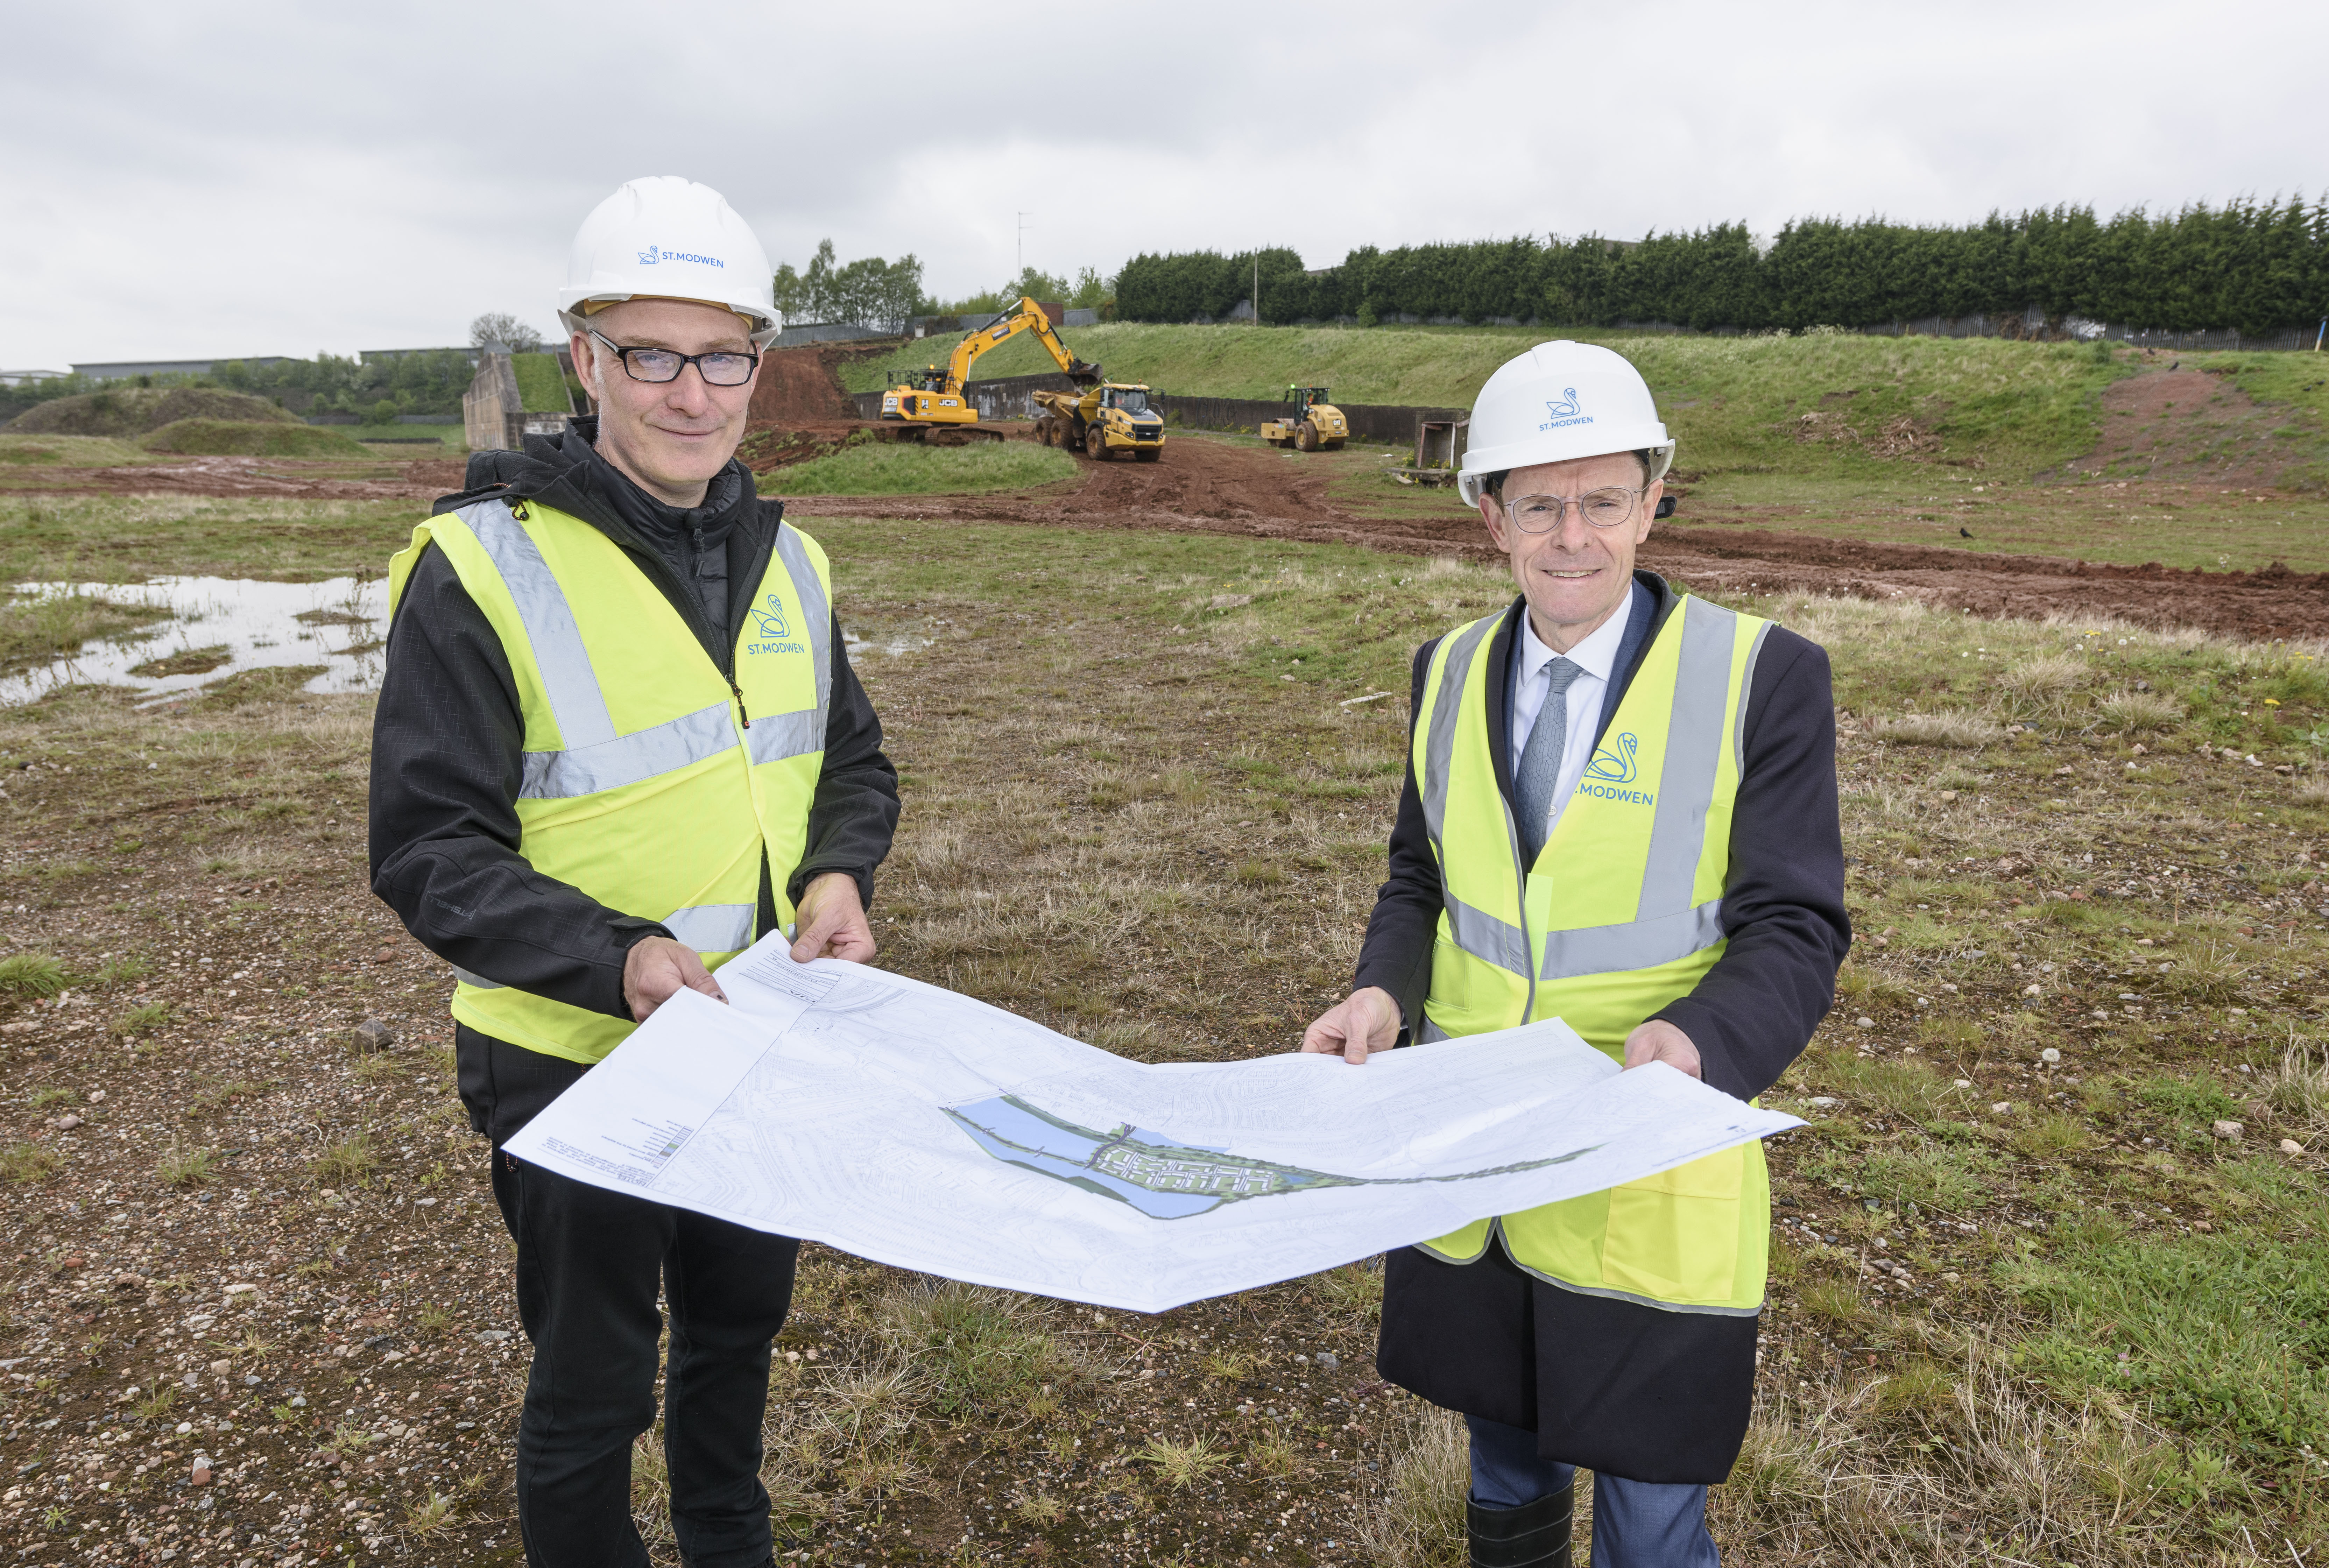 Rob Flavell, St Modwen's senior director for regeneration in the Midlands and North (left) and Andy Street, Mayor of the West Midlands (right) at the former West Works site in West Longbridge